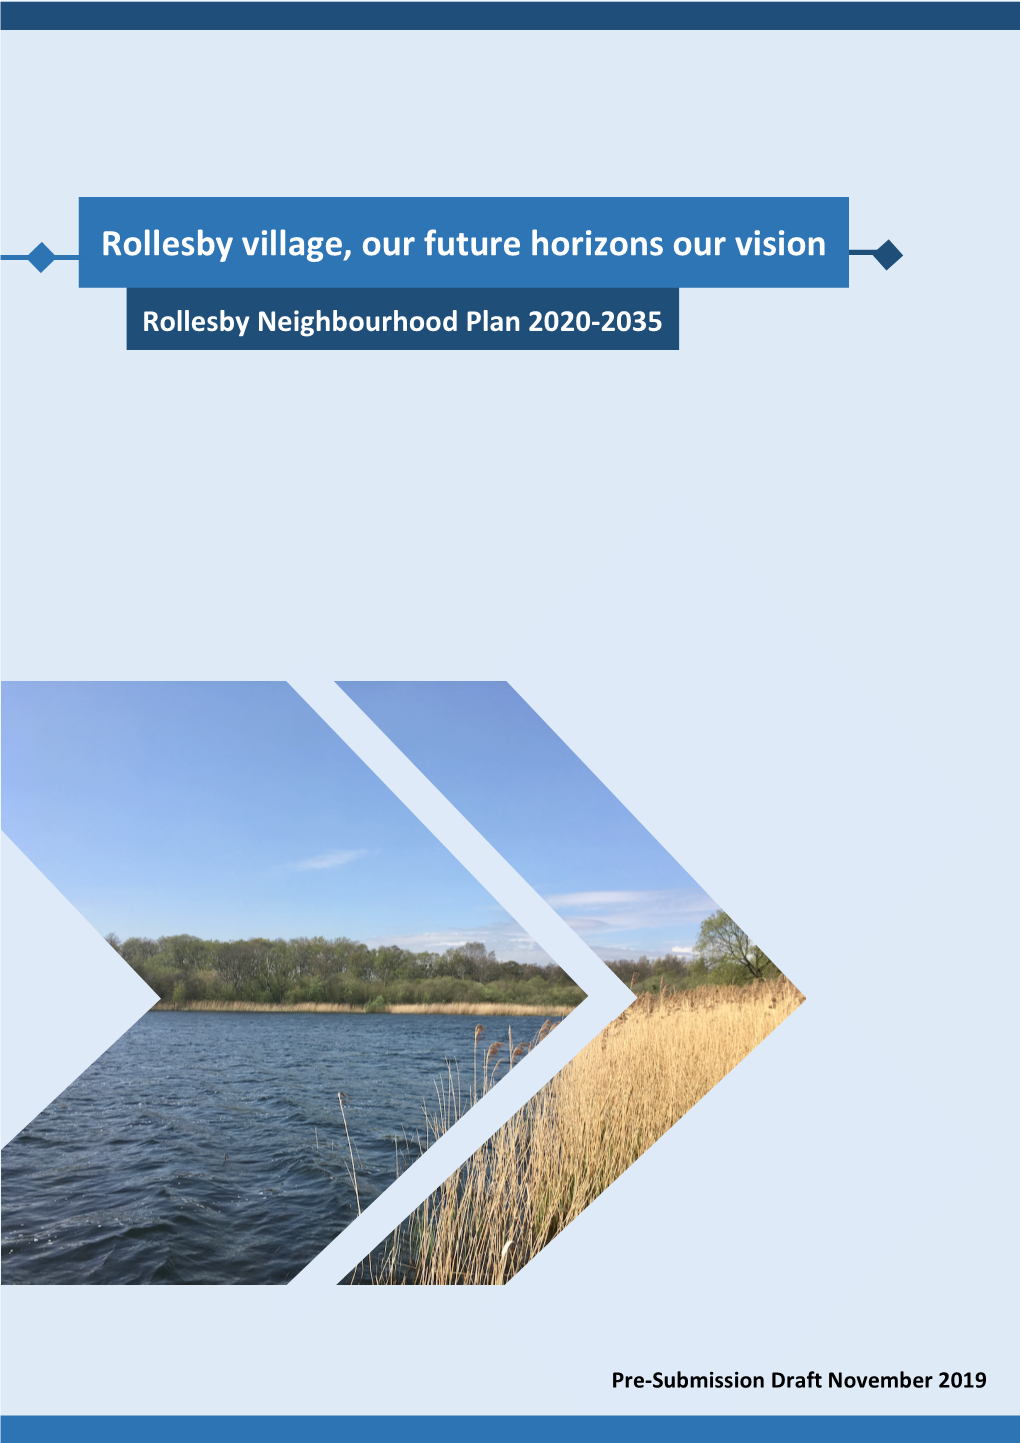 Rollesby Village, Our Future Horizons Our Vision